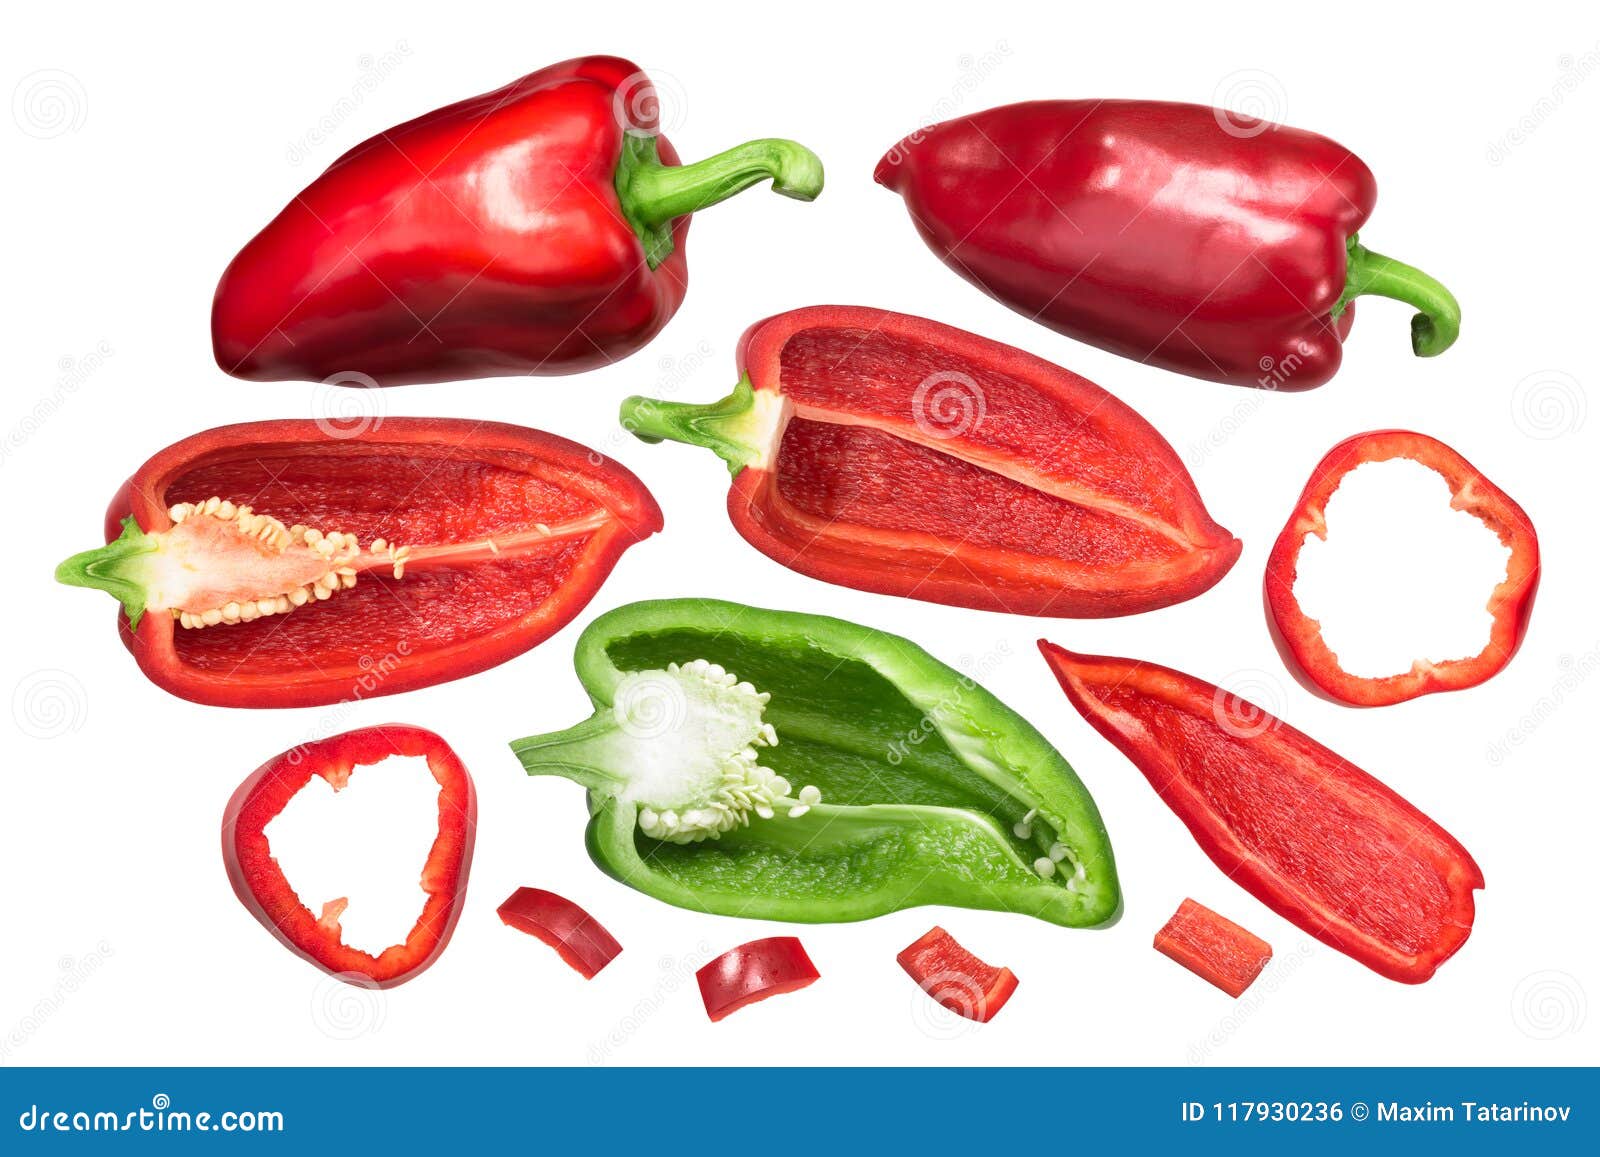 bell peppers grueso de plaza, whole and cut, top